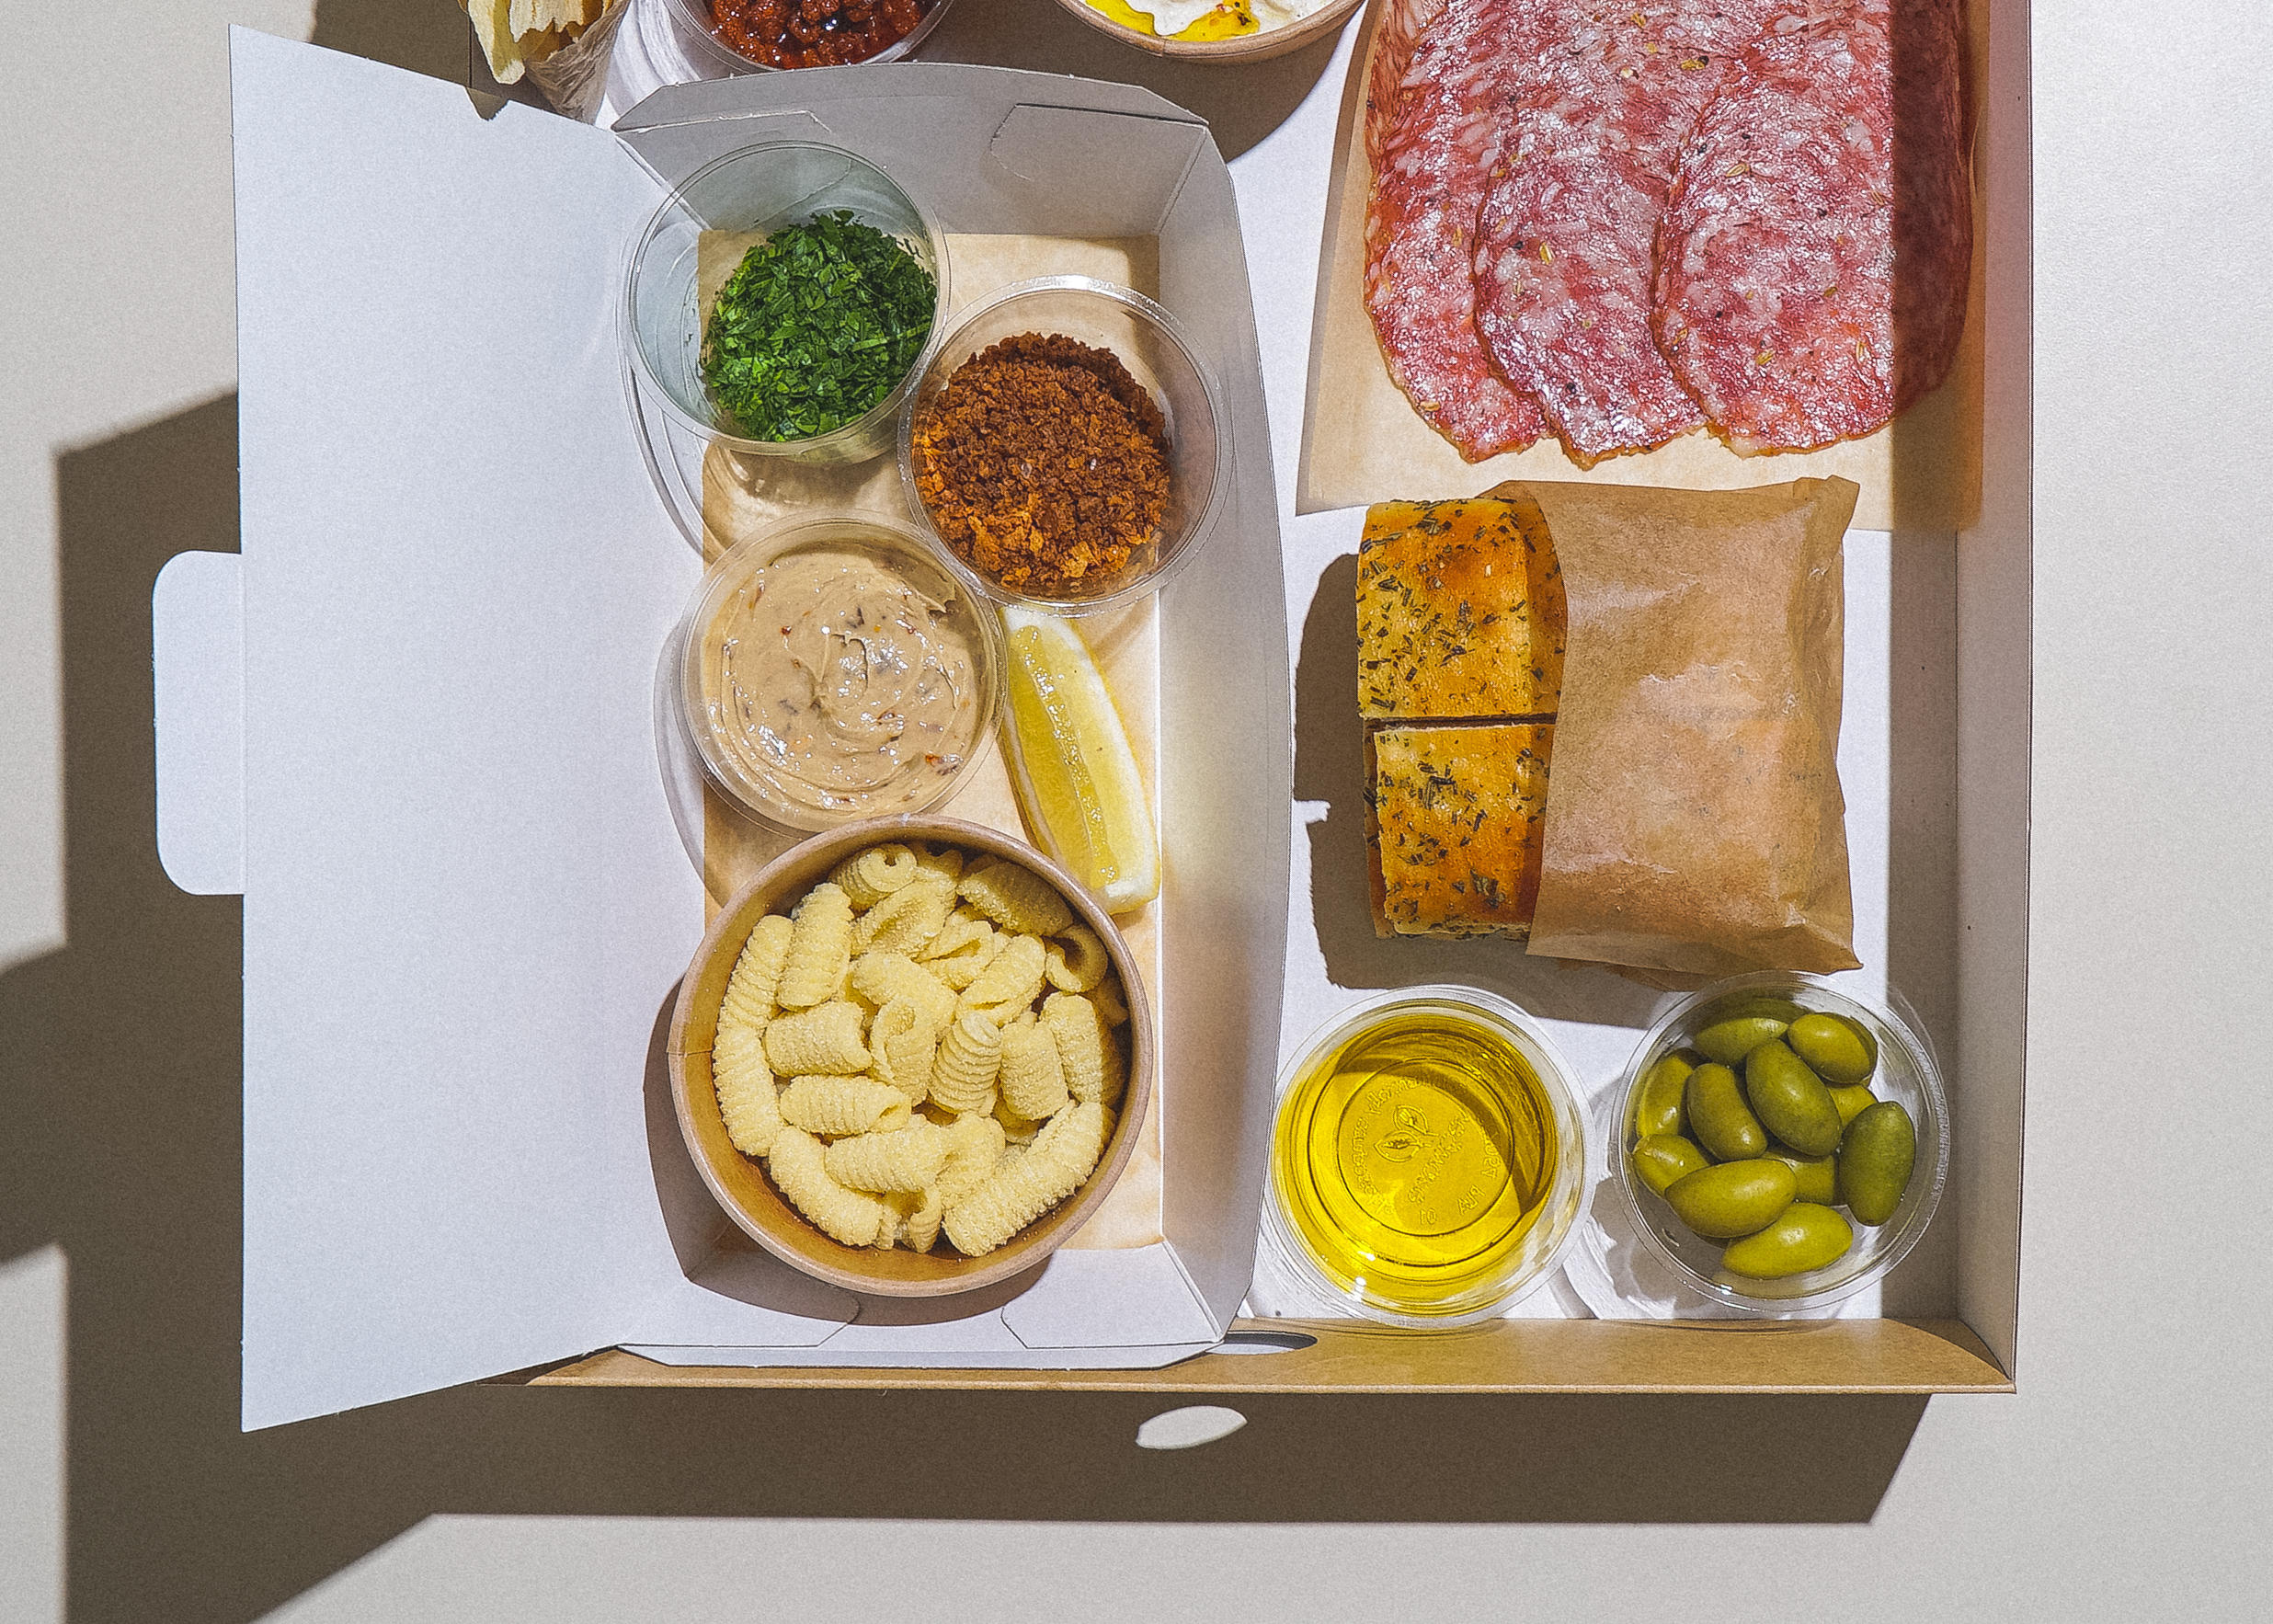 Fresh pasta, sauce, salumi, foccaccia, and olives in a cardboard meal kit box, shot from a birdseye view